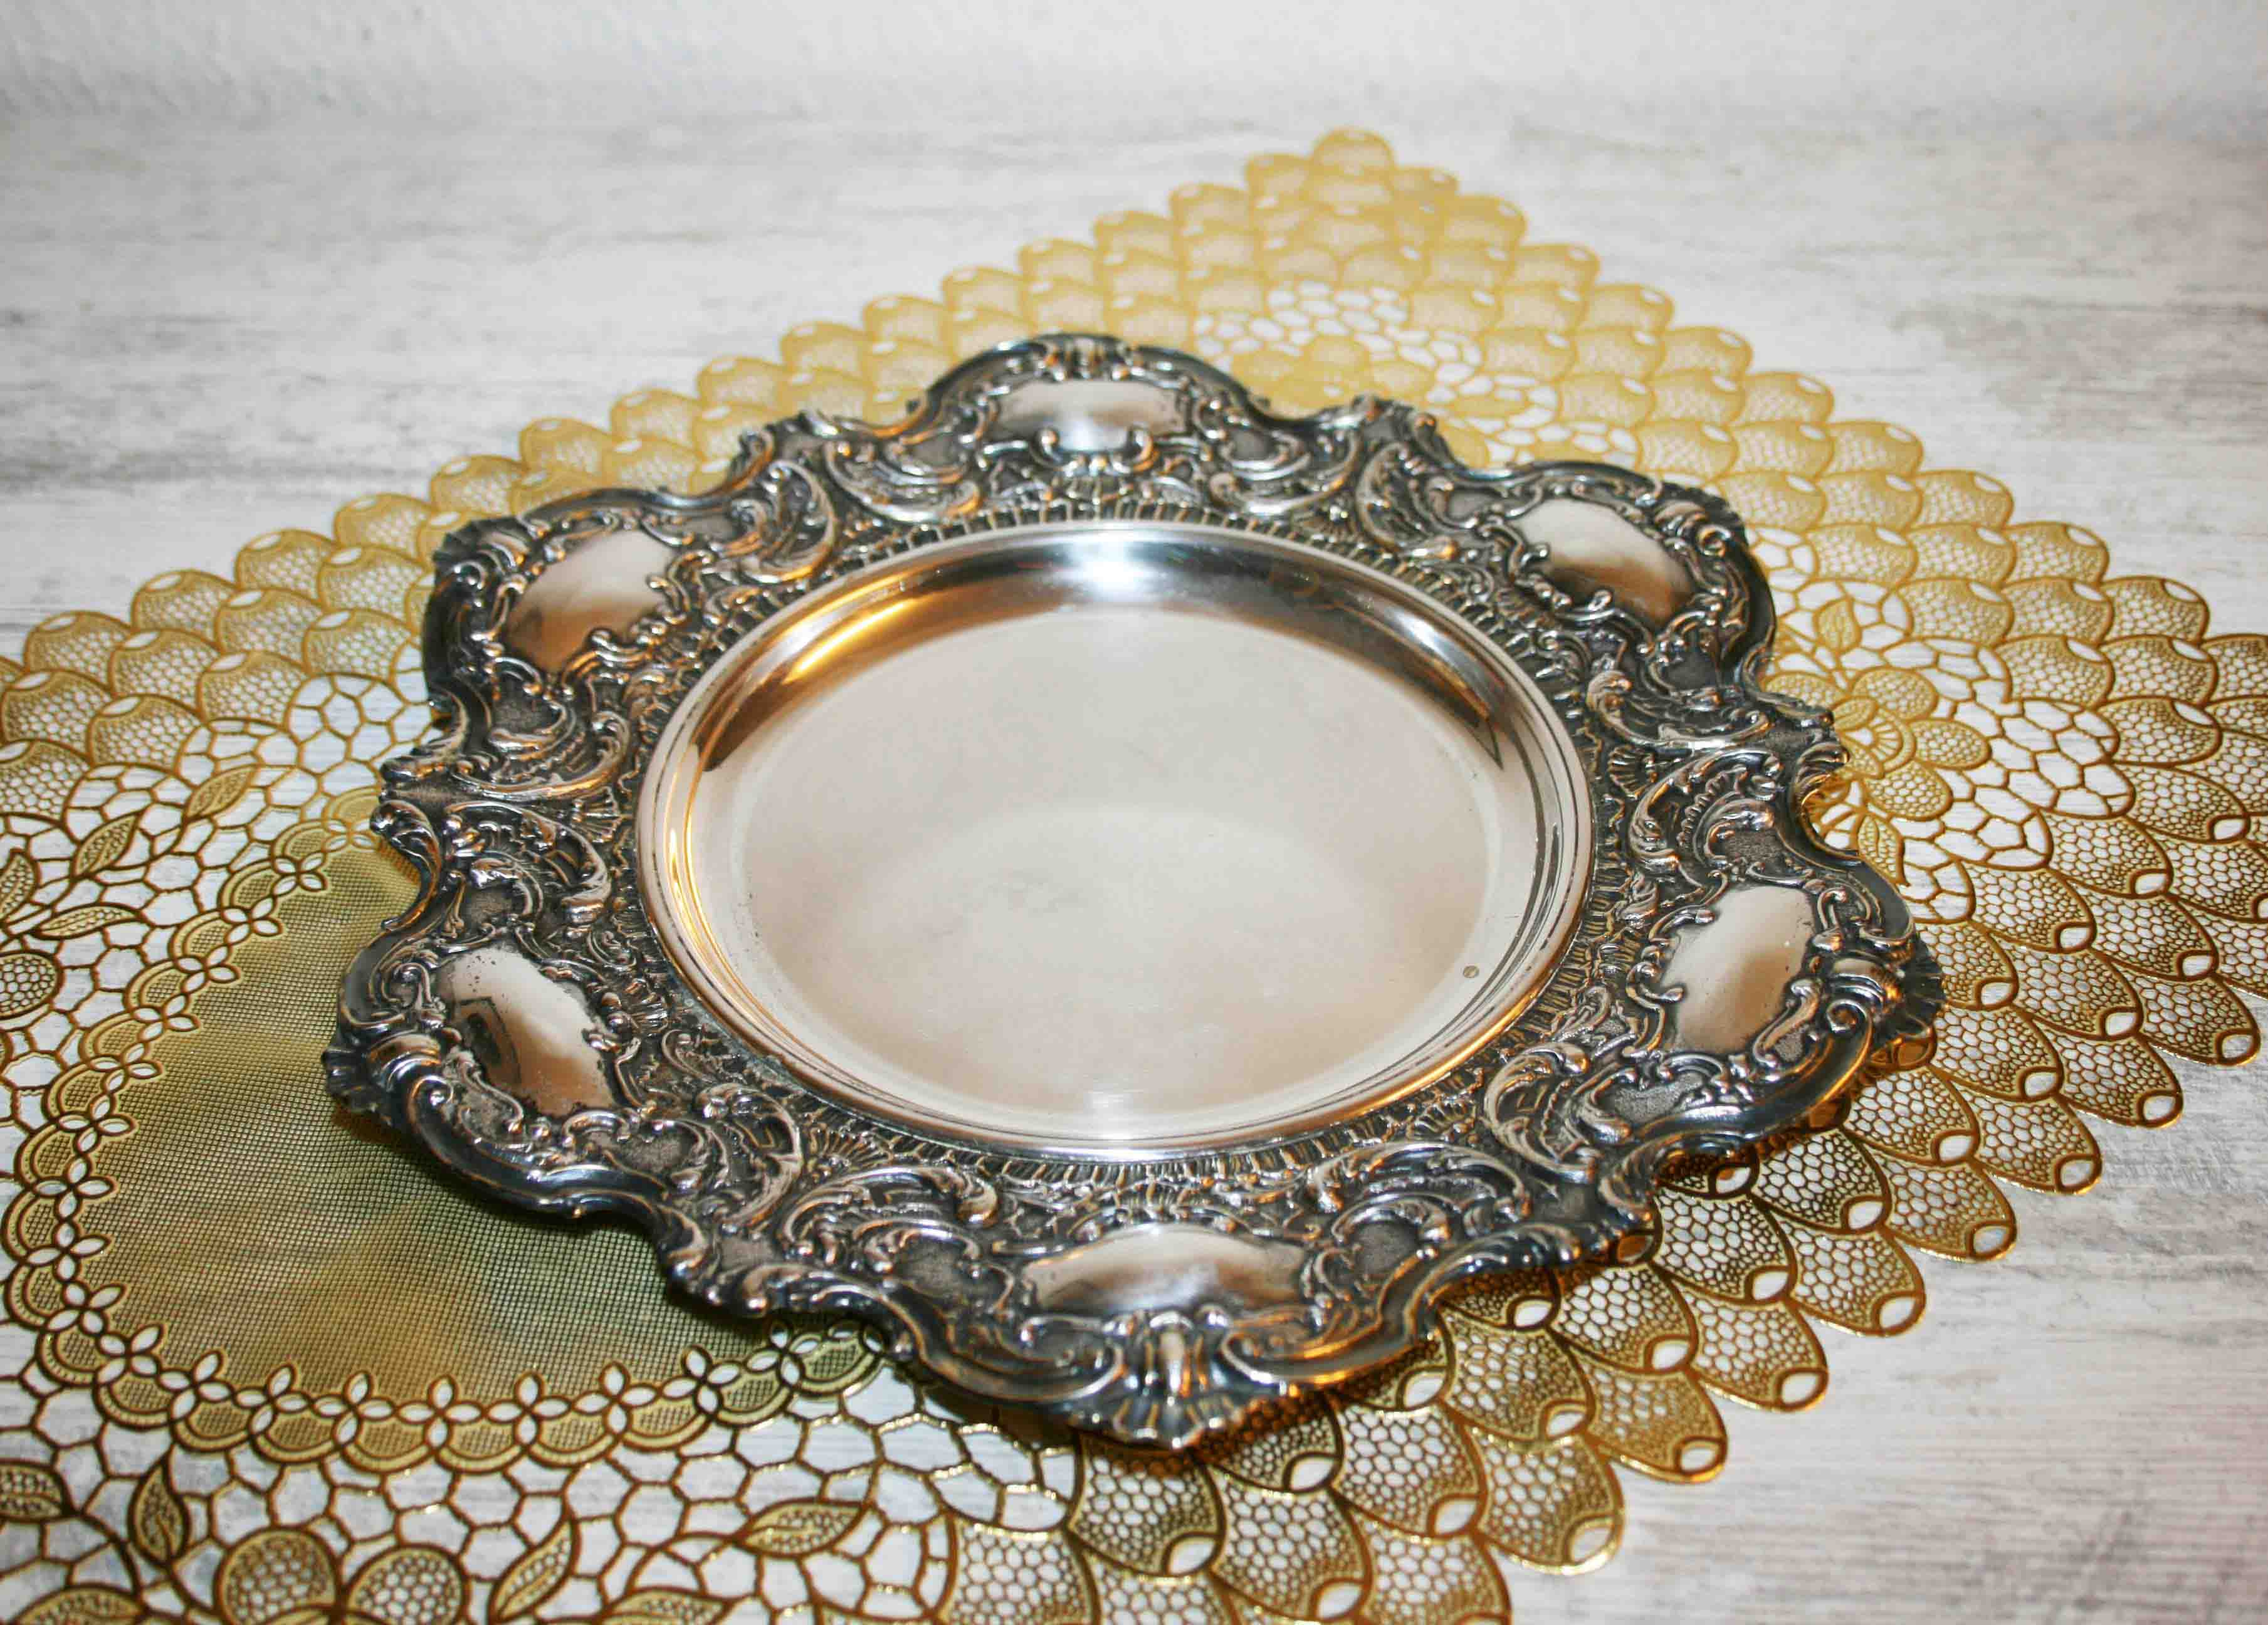 Embossed silver plate by Argenteria Stefani